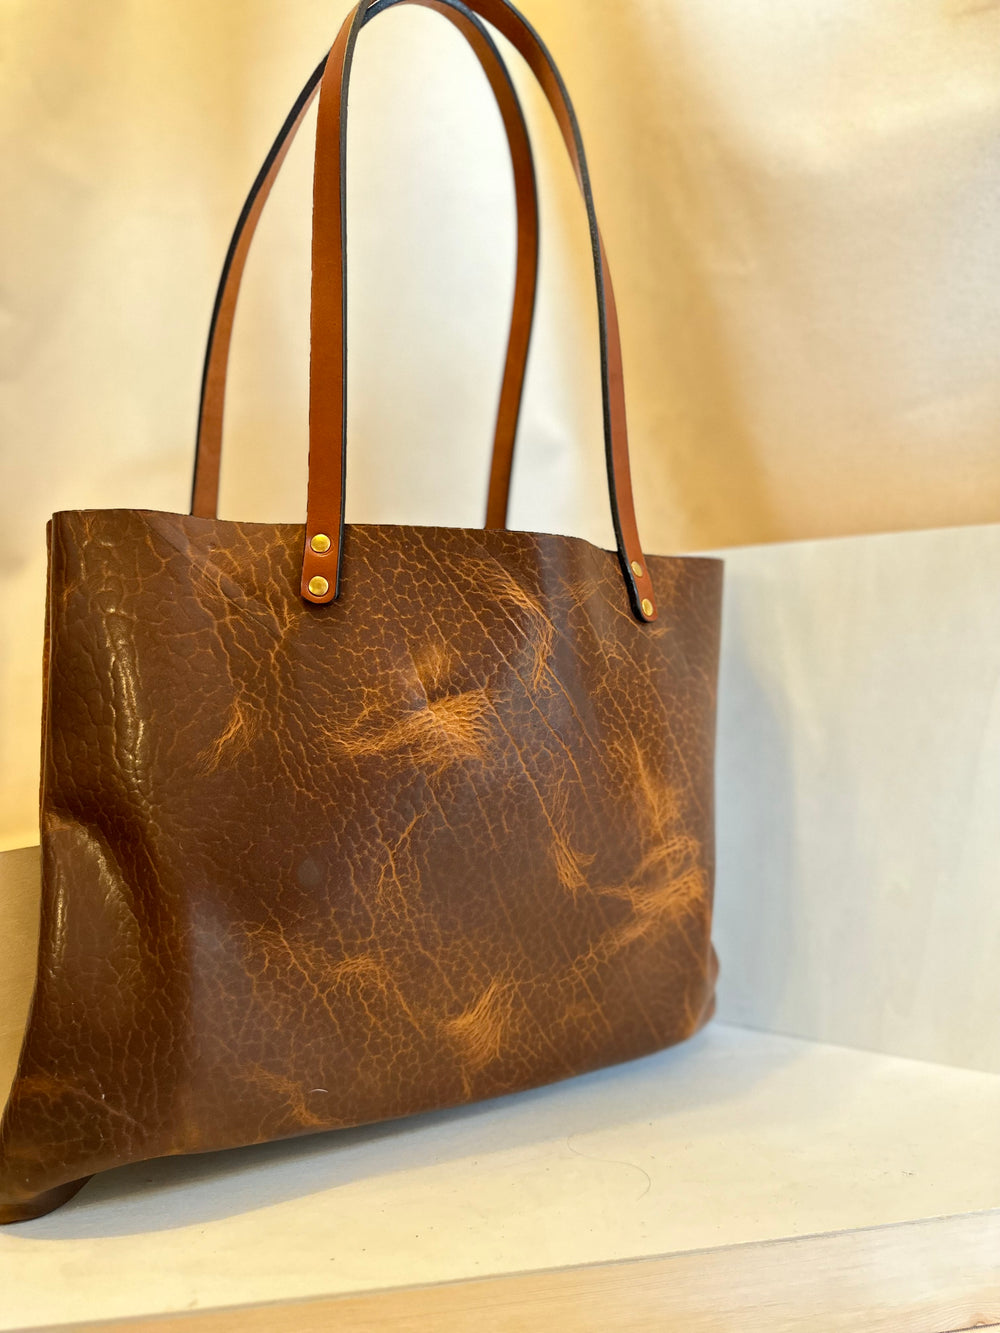 Shining Rock Goods crafts each and every bag in our Asheville, NC studio.  Our tote bags are made of USA tanned, solid, top grain, high quality, supple leather.  This bag will stand the test of time, more than normal wear and tear; it shows up and shows out.